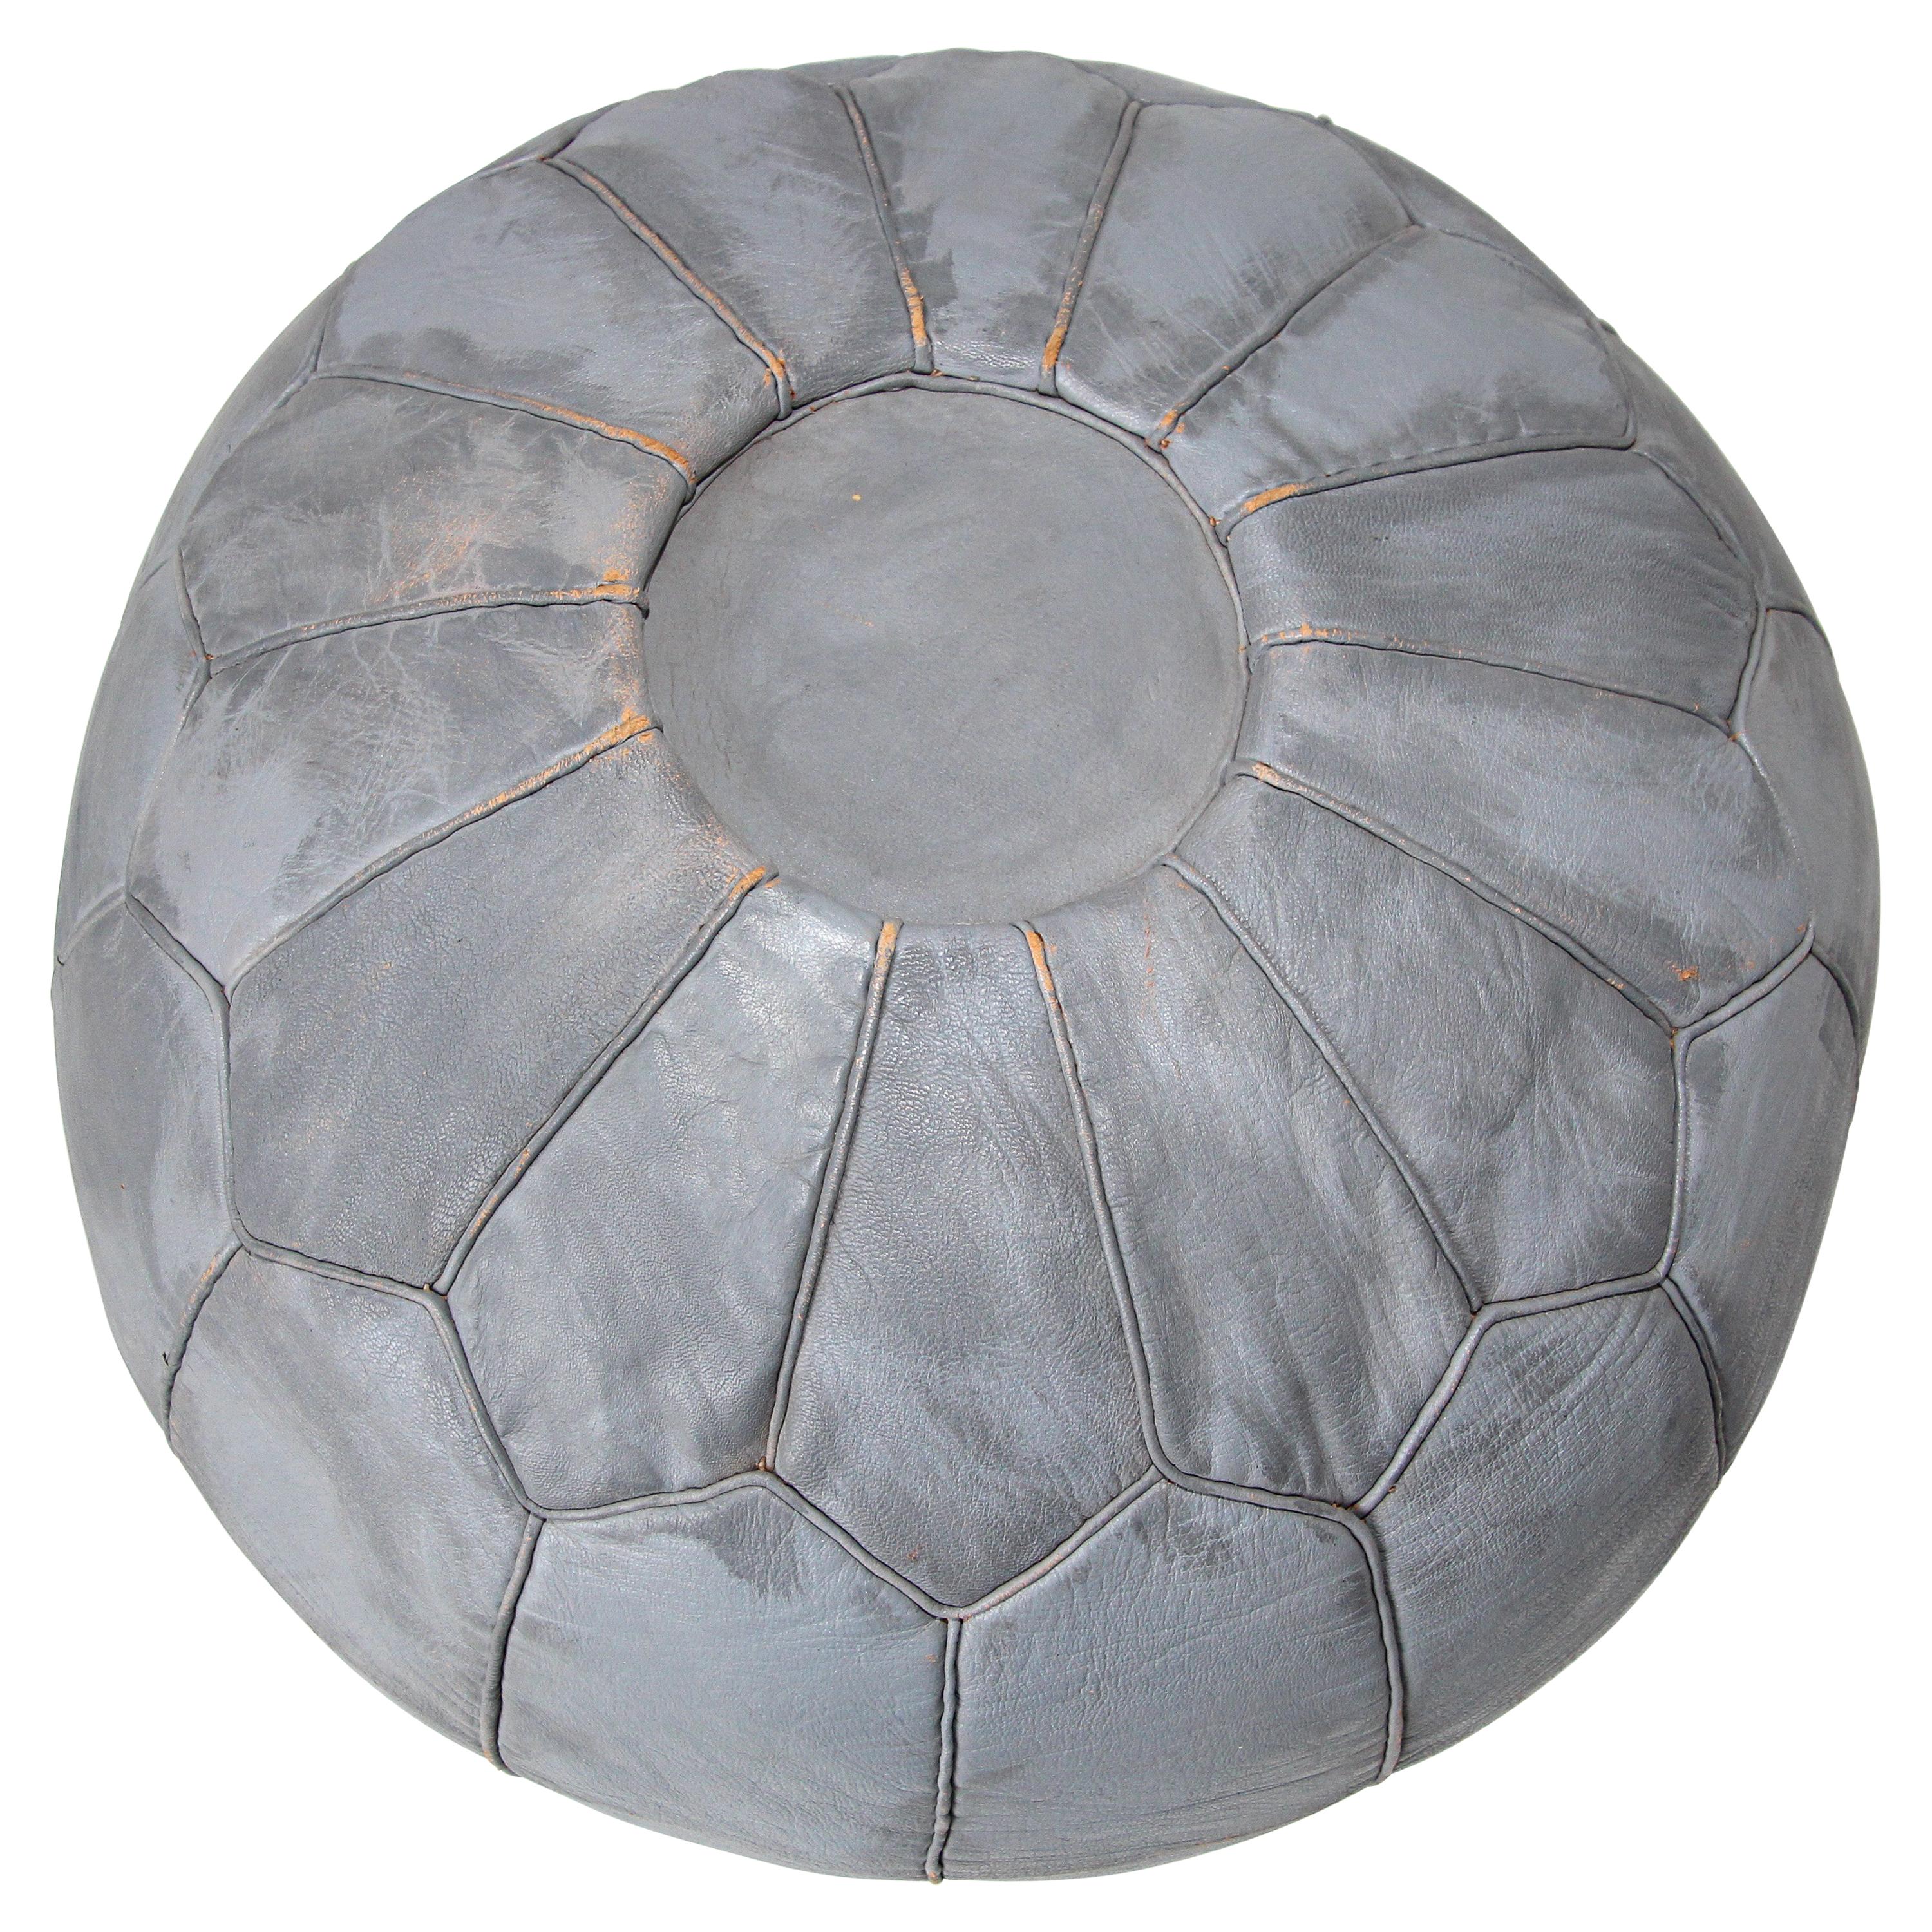 Vintage Moroccan Round Leather Pouf Hand-Tooled in Fez Morocco For Sale